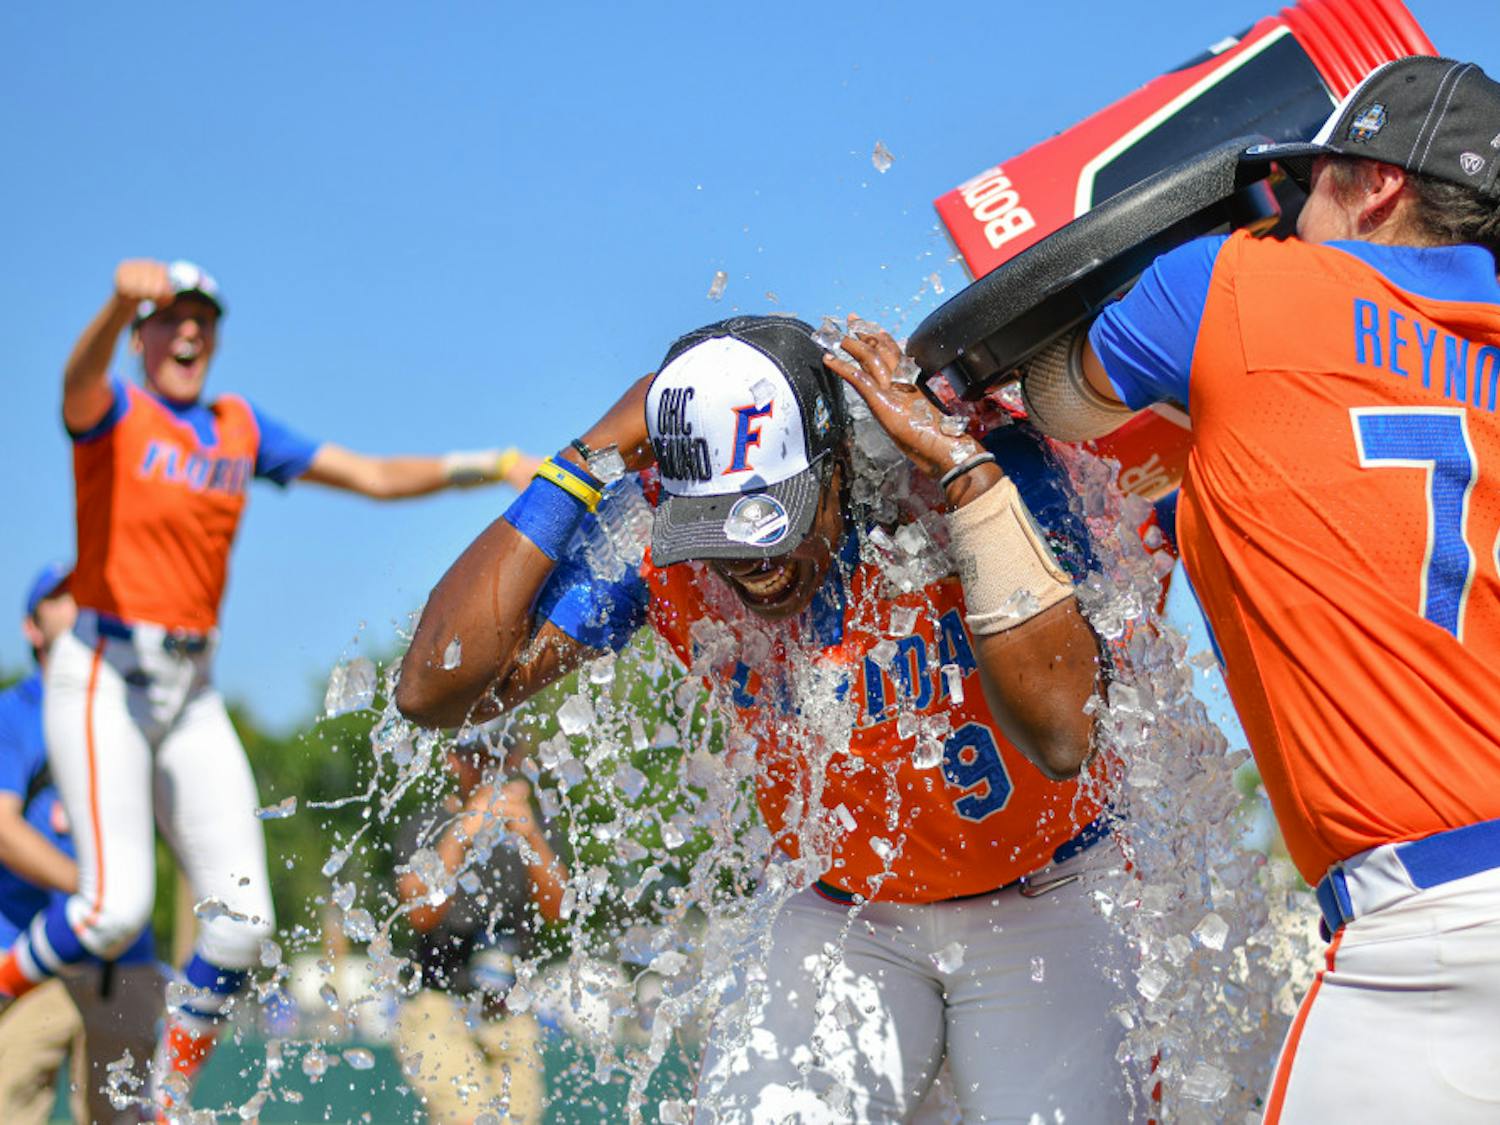 Jaimie Hoover's walk-off single sent the Gators to the Women’s College World Series for the third-consecutive season.